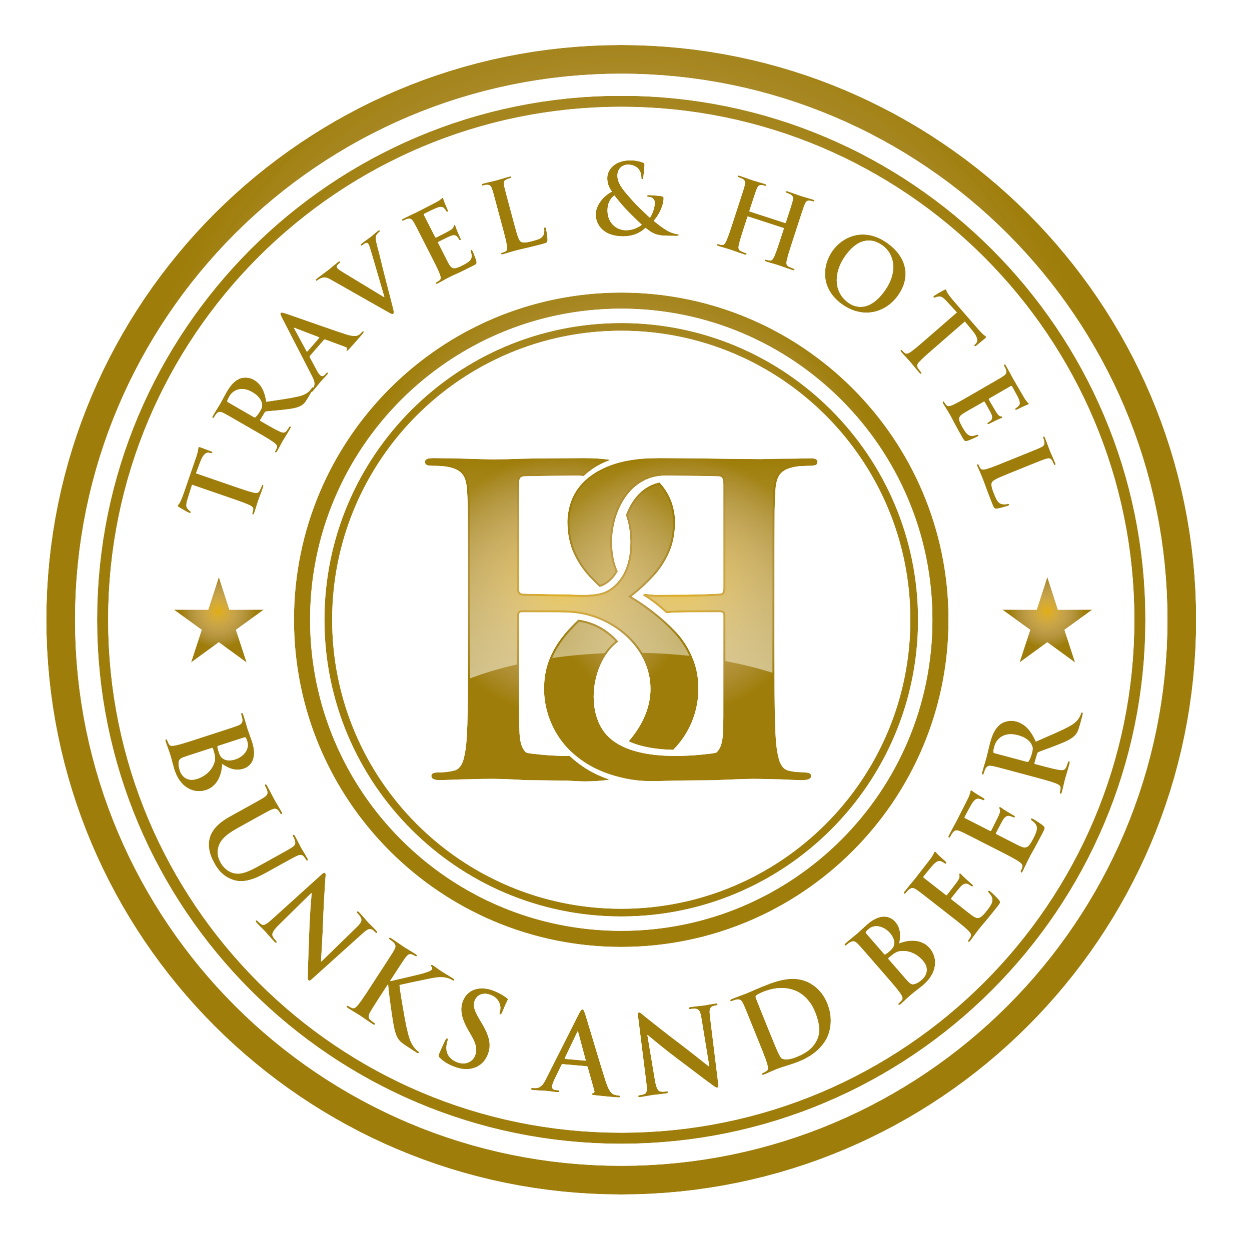 Bunks and Beer is a travel, hotel, restaurant, tavern and beer company. Our mission is to bring you great promotions and opportunities from around the world!